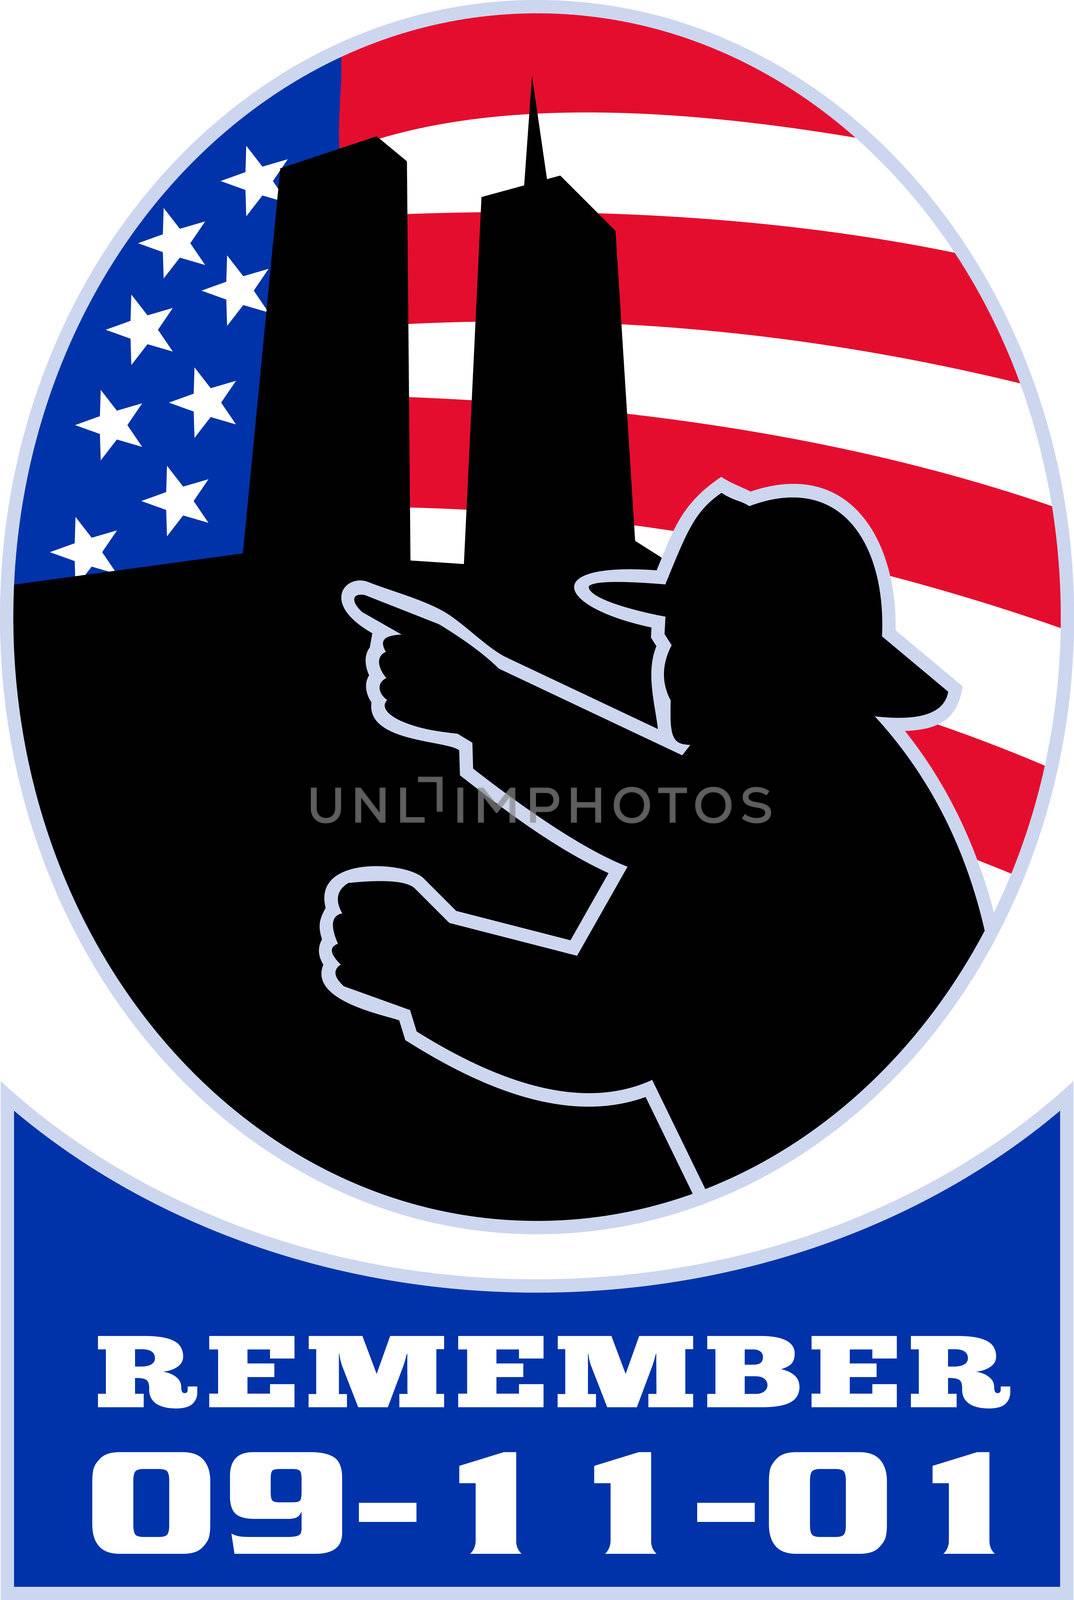 illustration of a fireman firefighter silhouette pointing to twin tower world trade center wtc building with American stars and stripes flag in background and words "Remember 9-11-01"